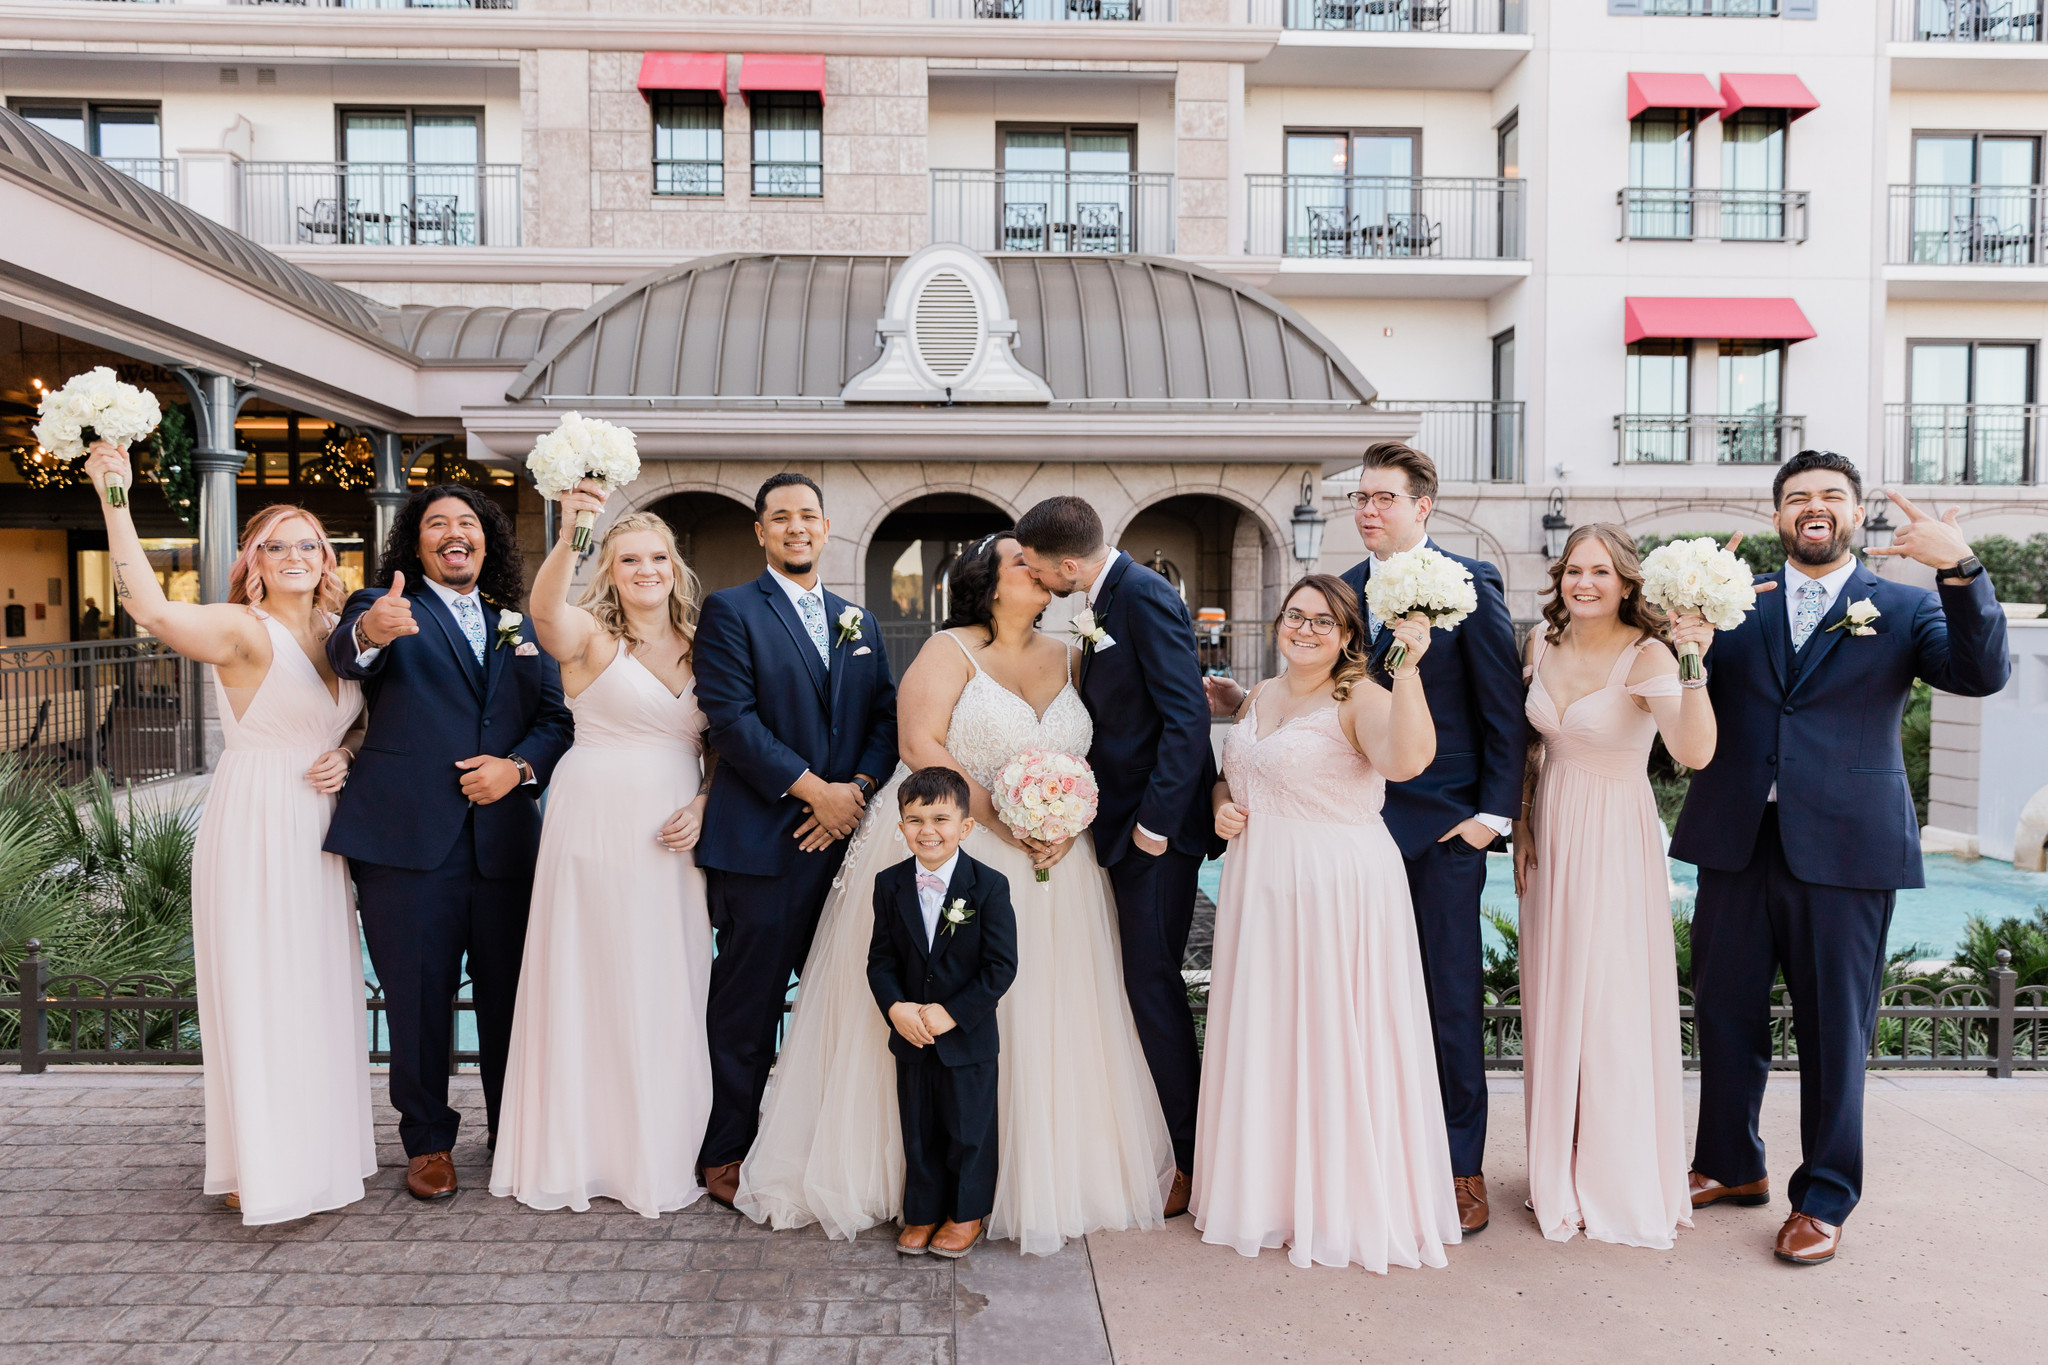 Disney wedding photos in Florida by Jess Collins Photography